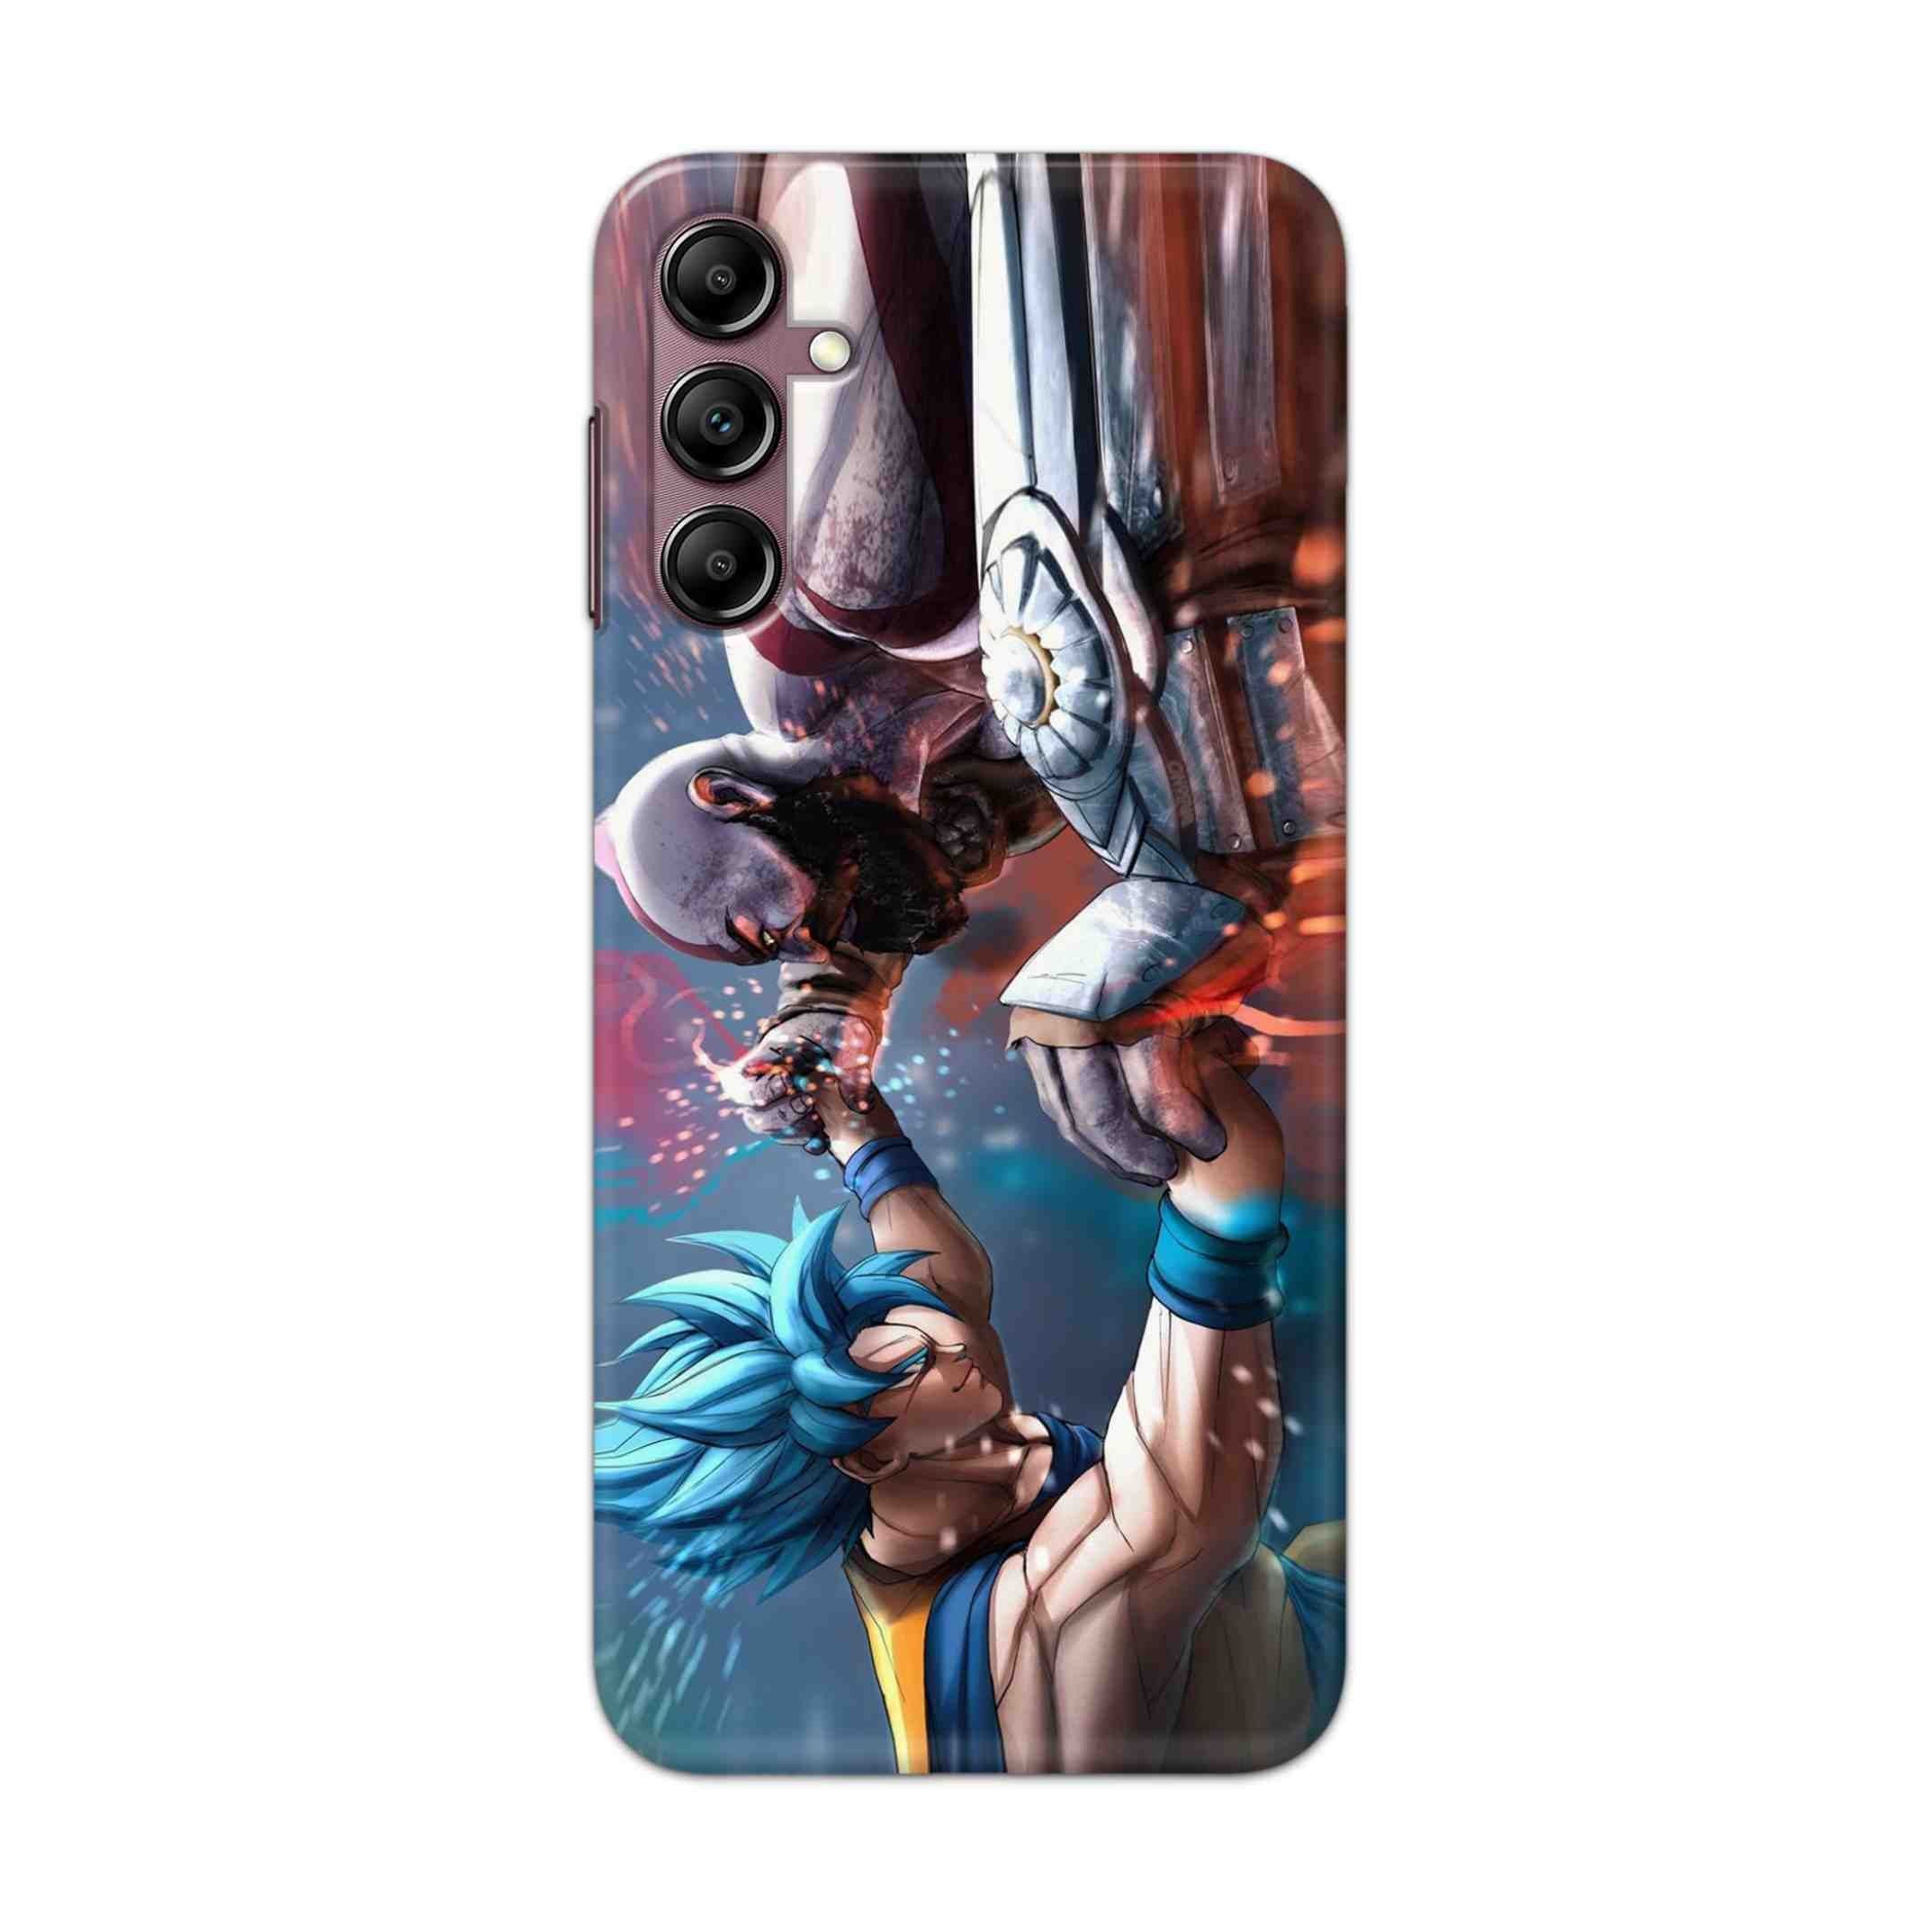 Buy Goku Vs Kratos Hard Back Mobile Phone Case Cover For Samsung Galaxy A14 Online